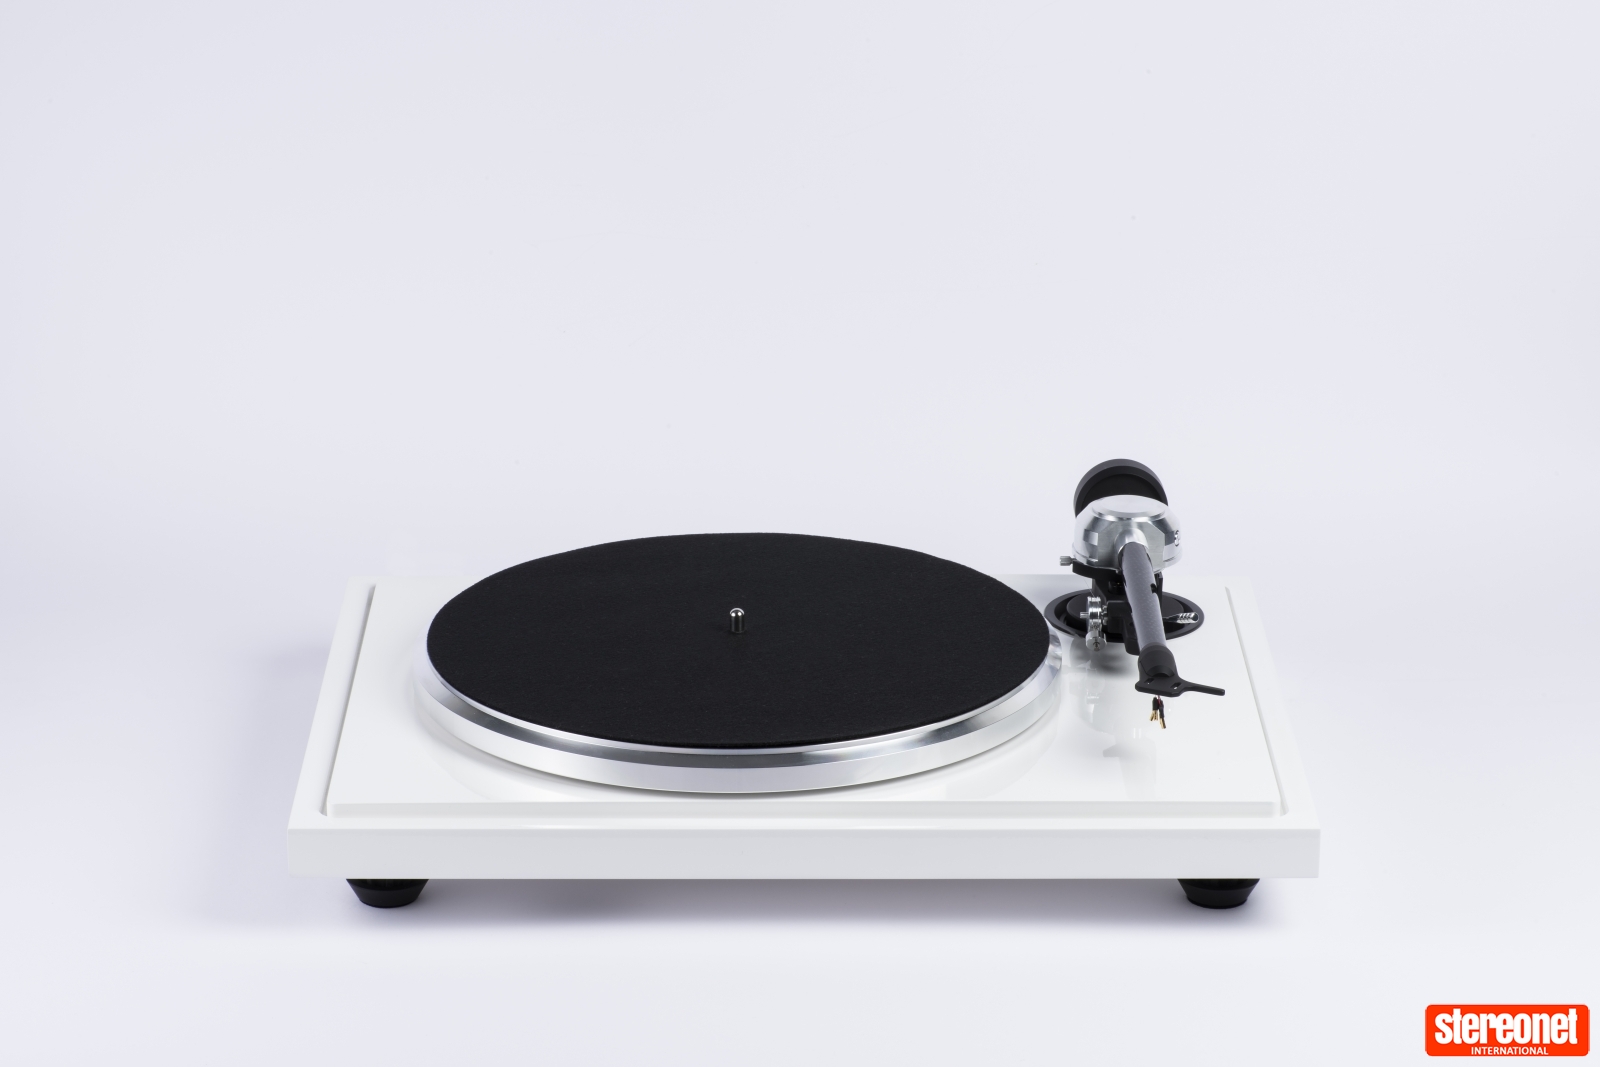 eat b sharp turntable review